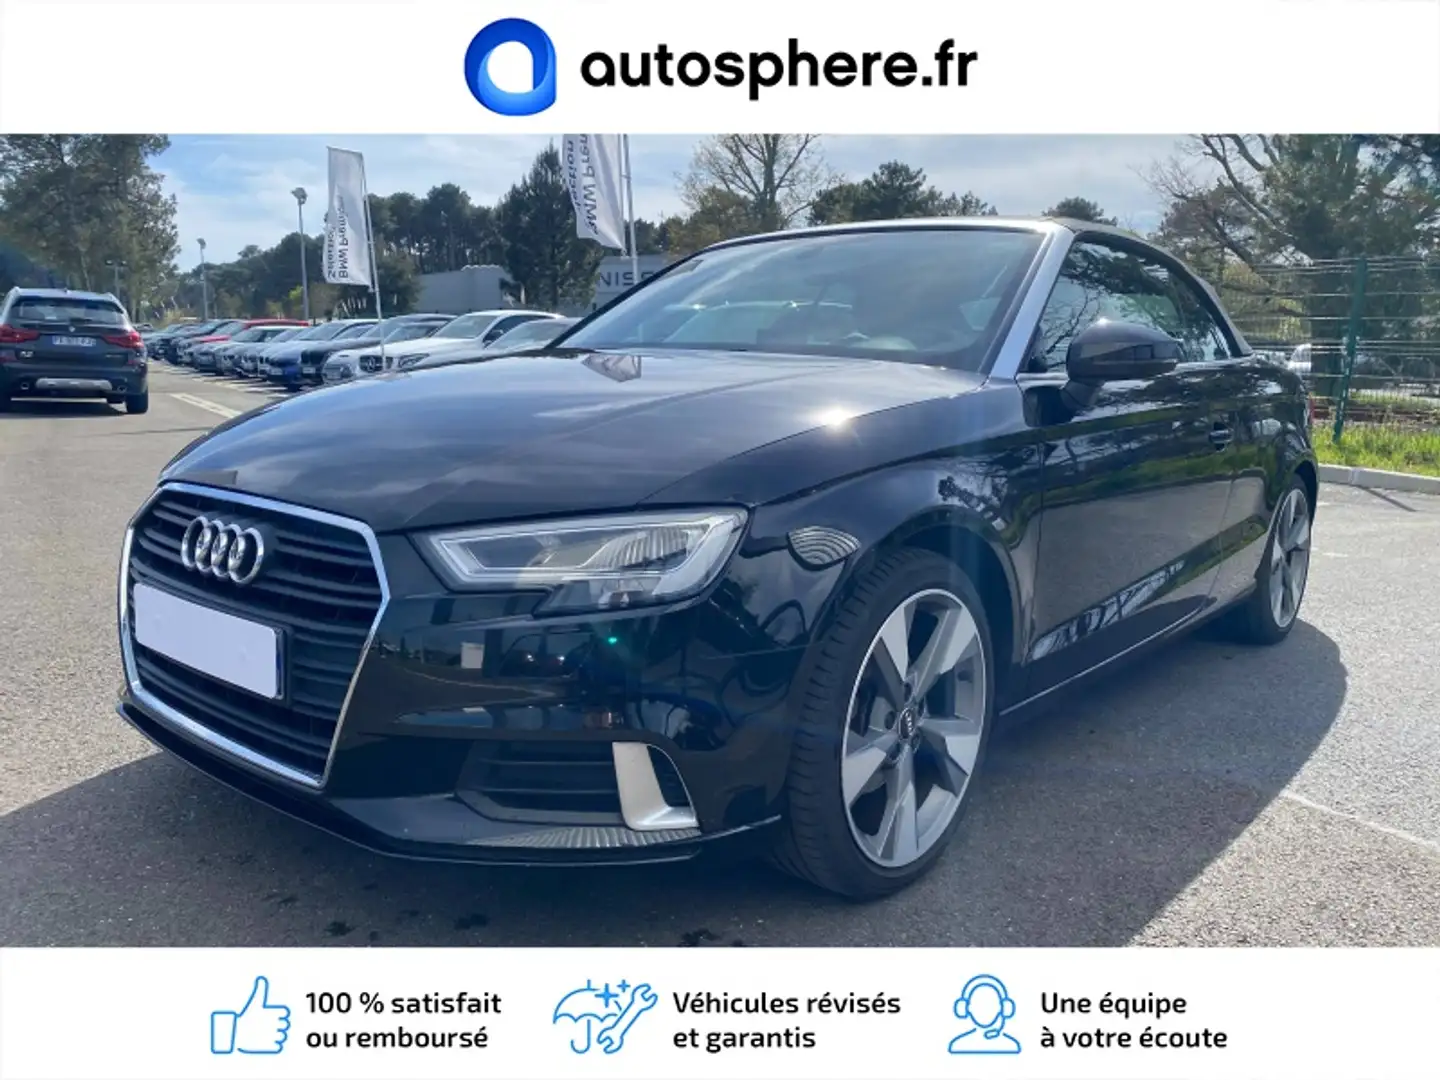 Audi Cabriolet 1.4 TFSI 150ch ultra COD Ambition Luxe S tronic 7 - 2